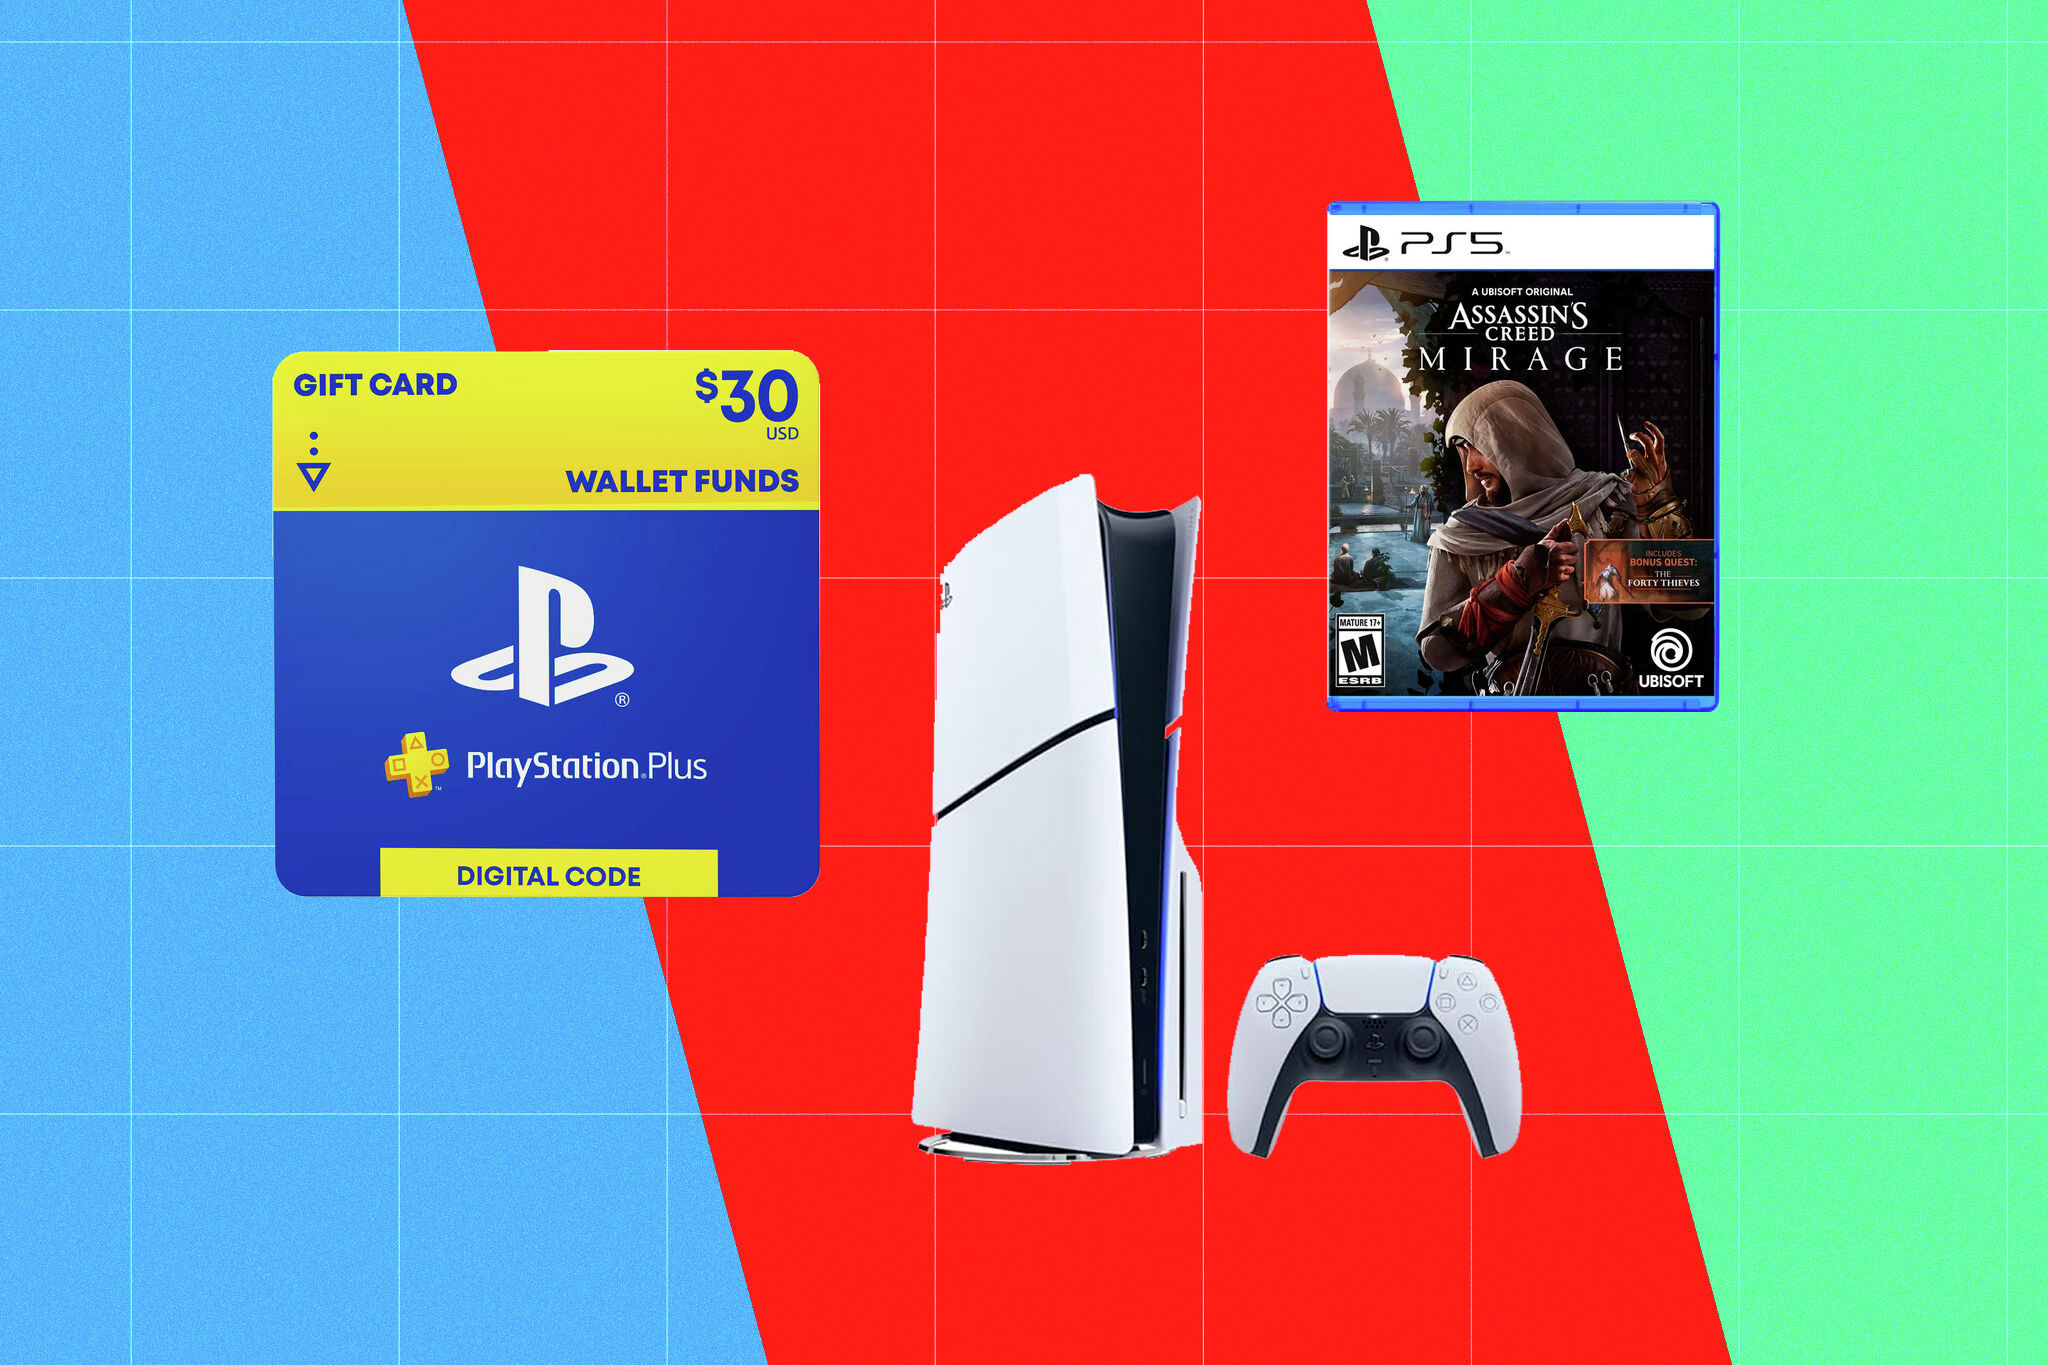 PS5 Cyber Monday deals: Playstation bundles and games up to 53% off